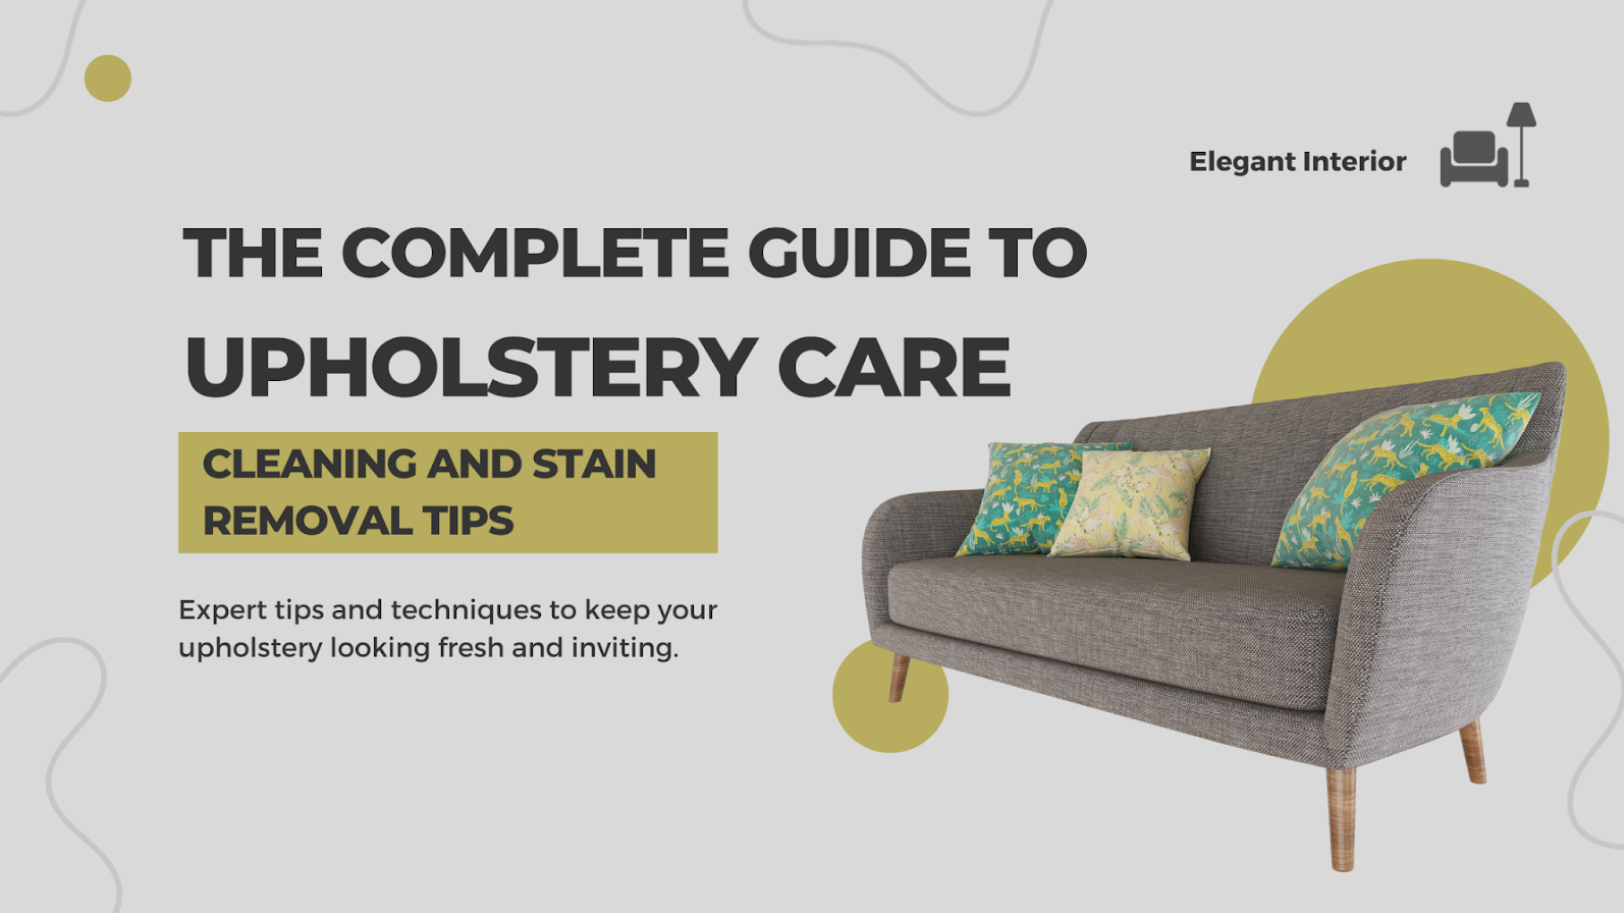 The Complete Guide to Upholstery Care: Cleaning and Stain Removal Tips